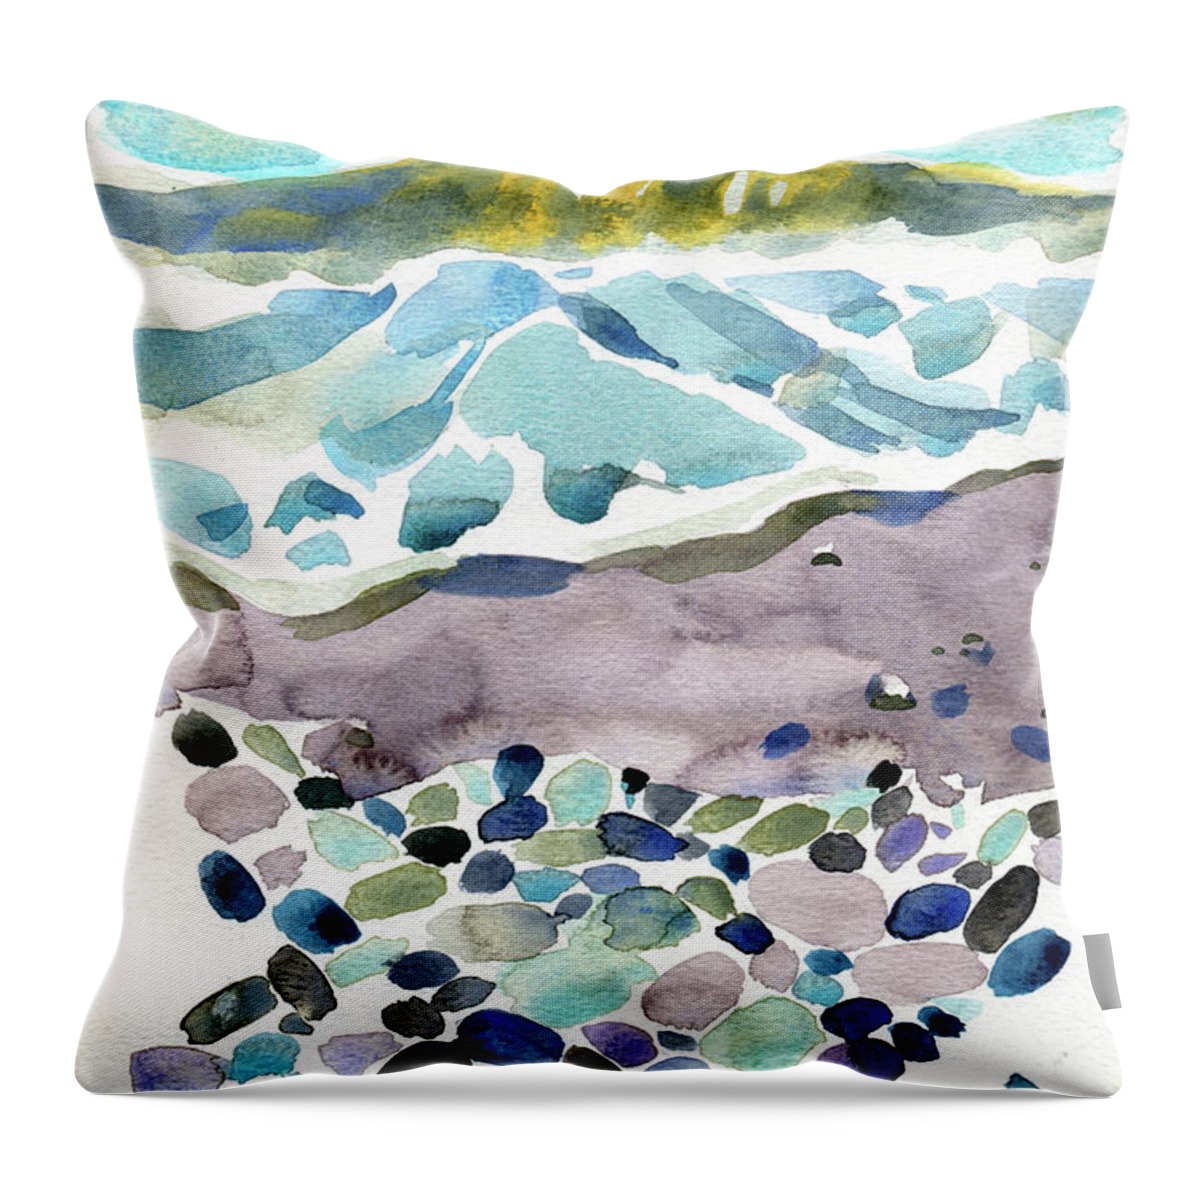 Watercolor Throw Pillow featuring the digital art Watercolor Sea And Pebbles Painting by Sambel Pedes